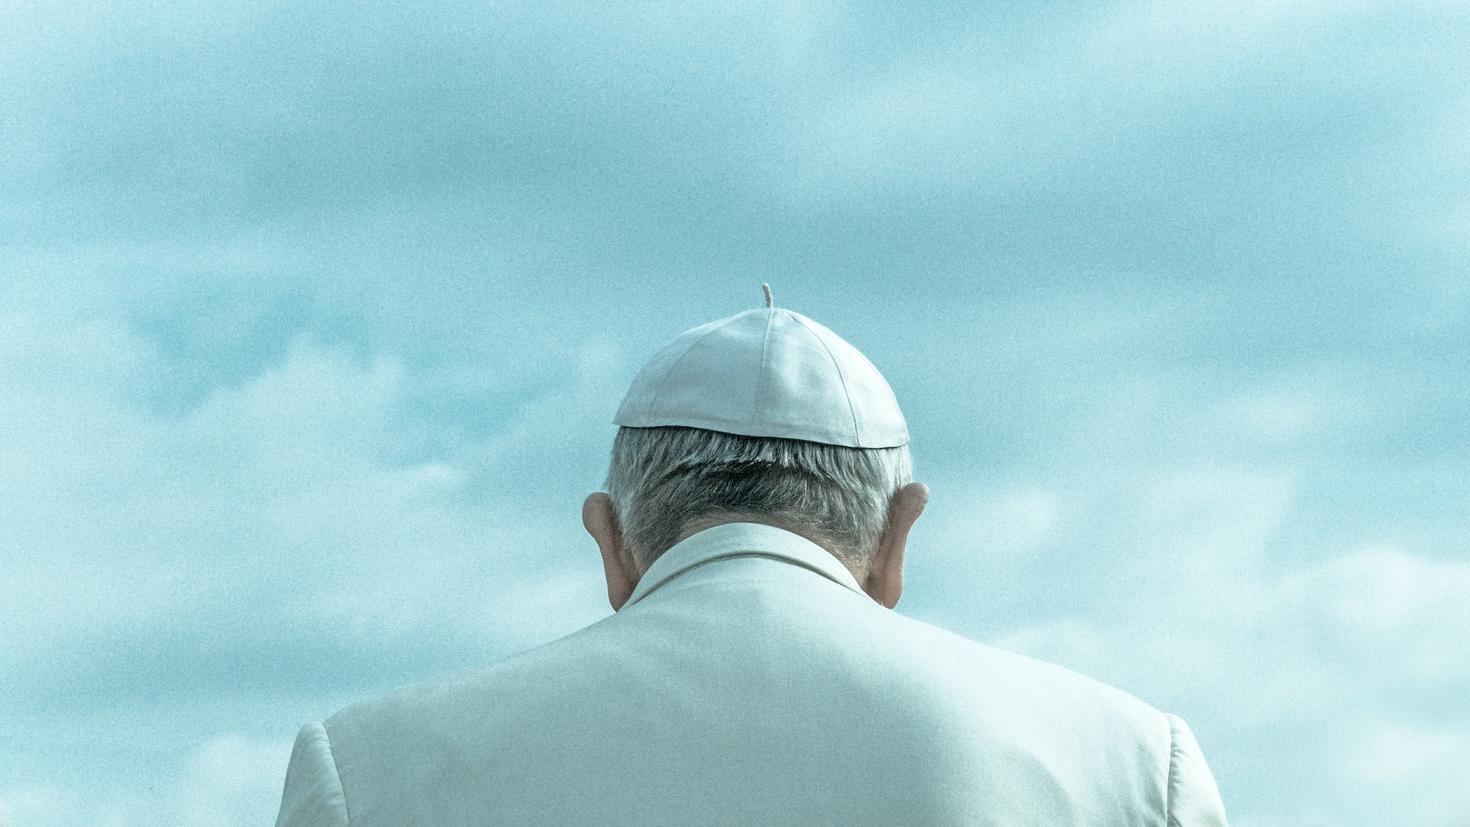  View of the pope from behind